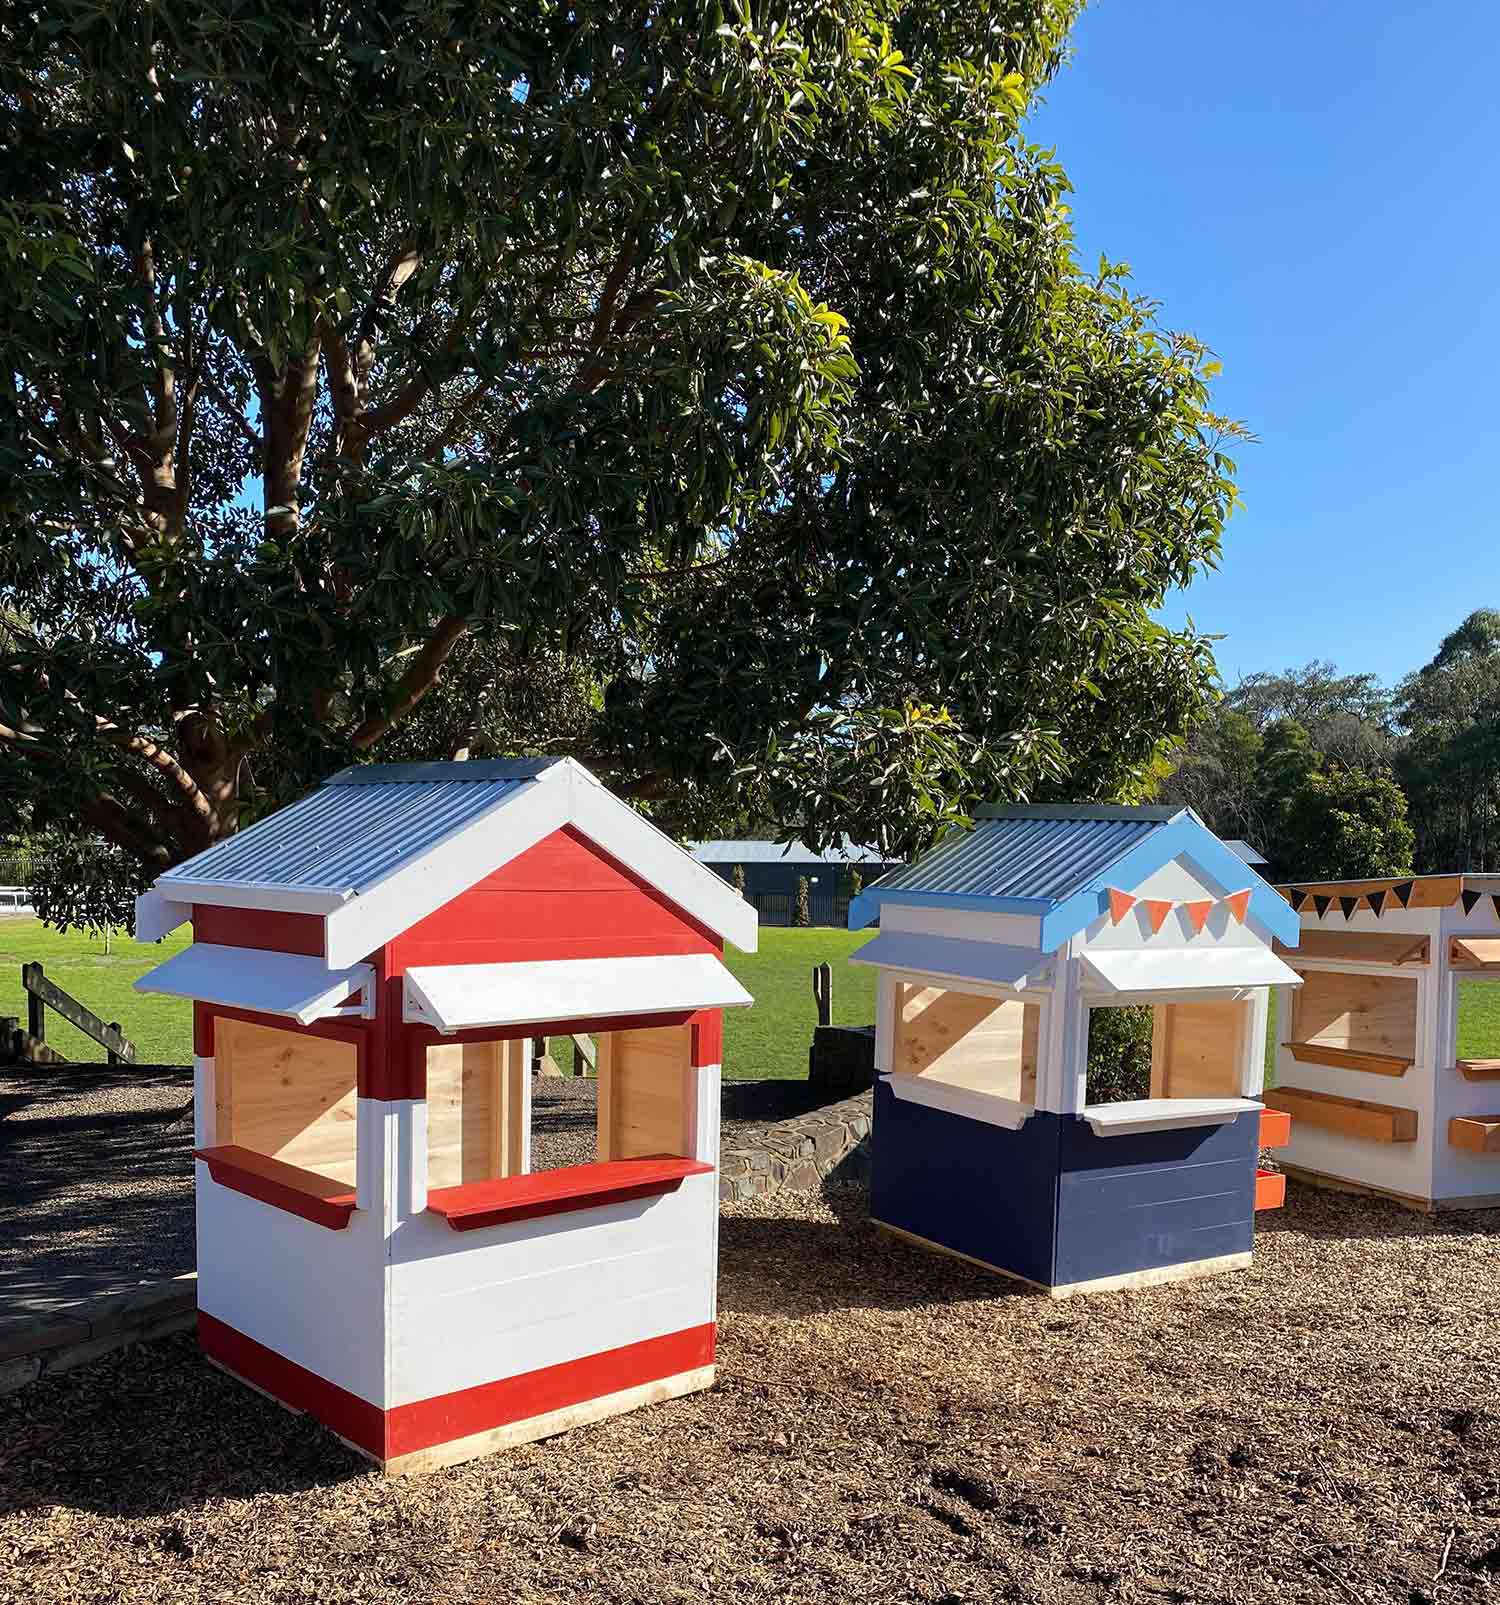 Wooden Cubby House Village at Belgrave South Primary School